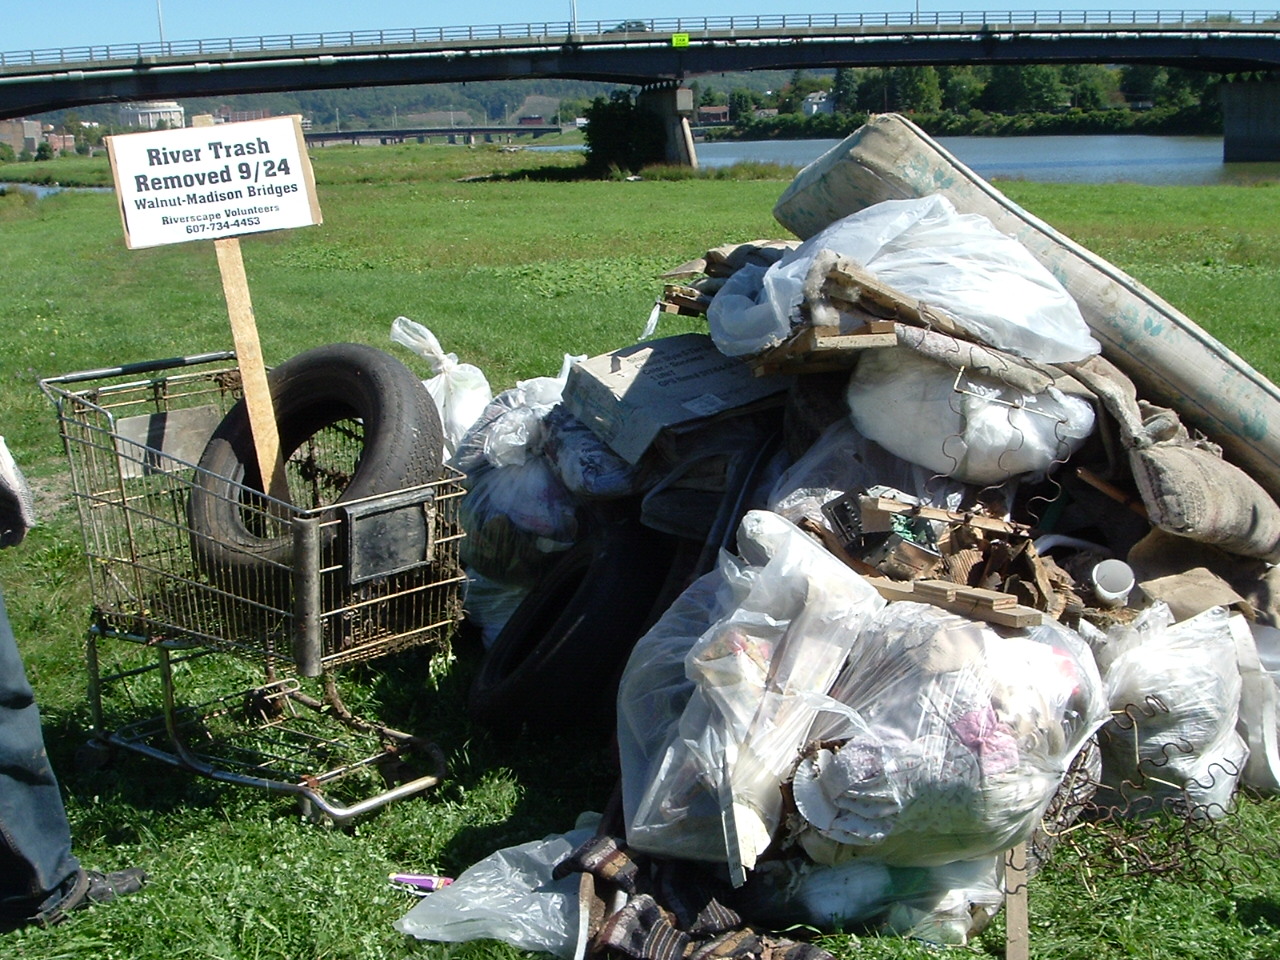 Pile of Trash Collected from River